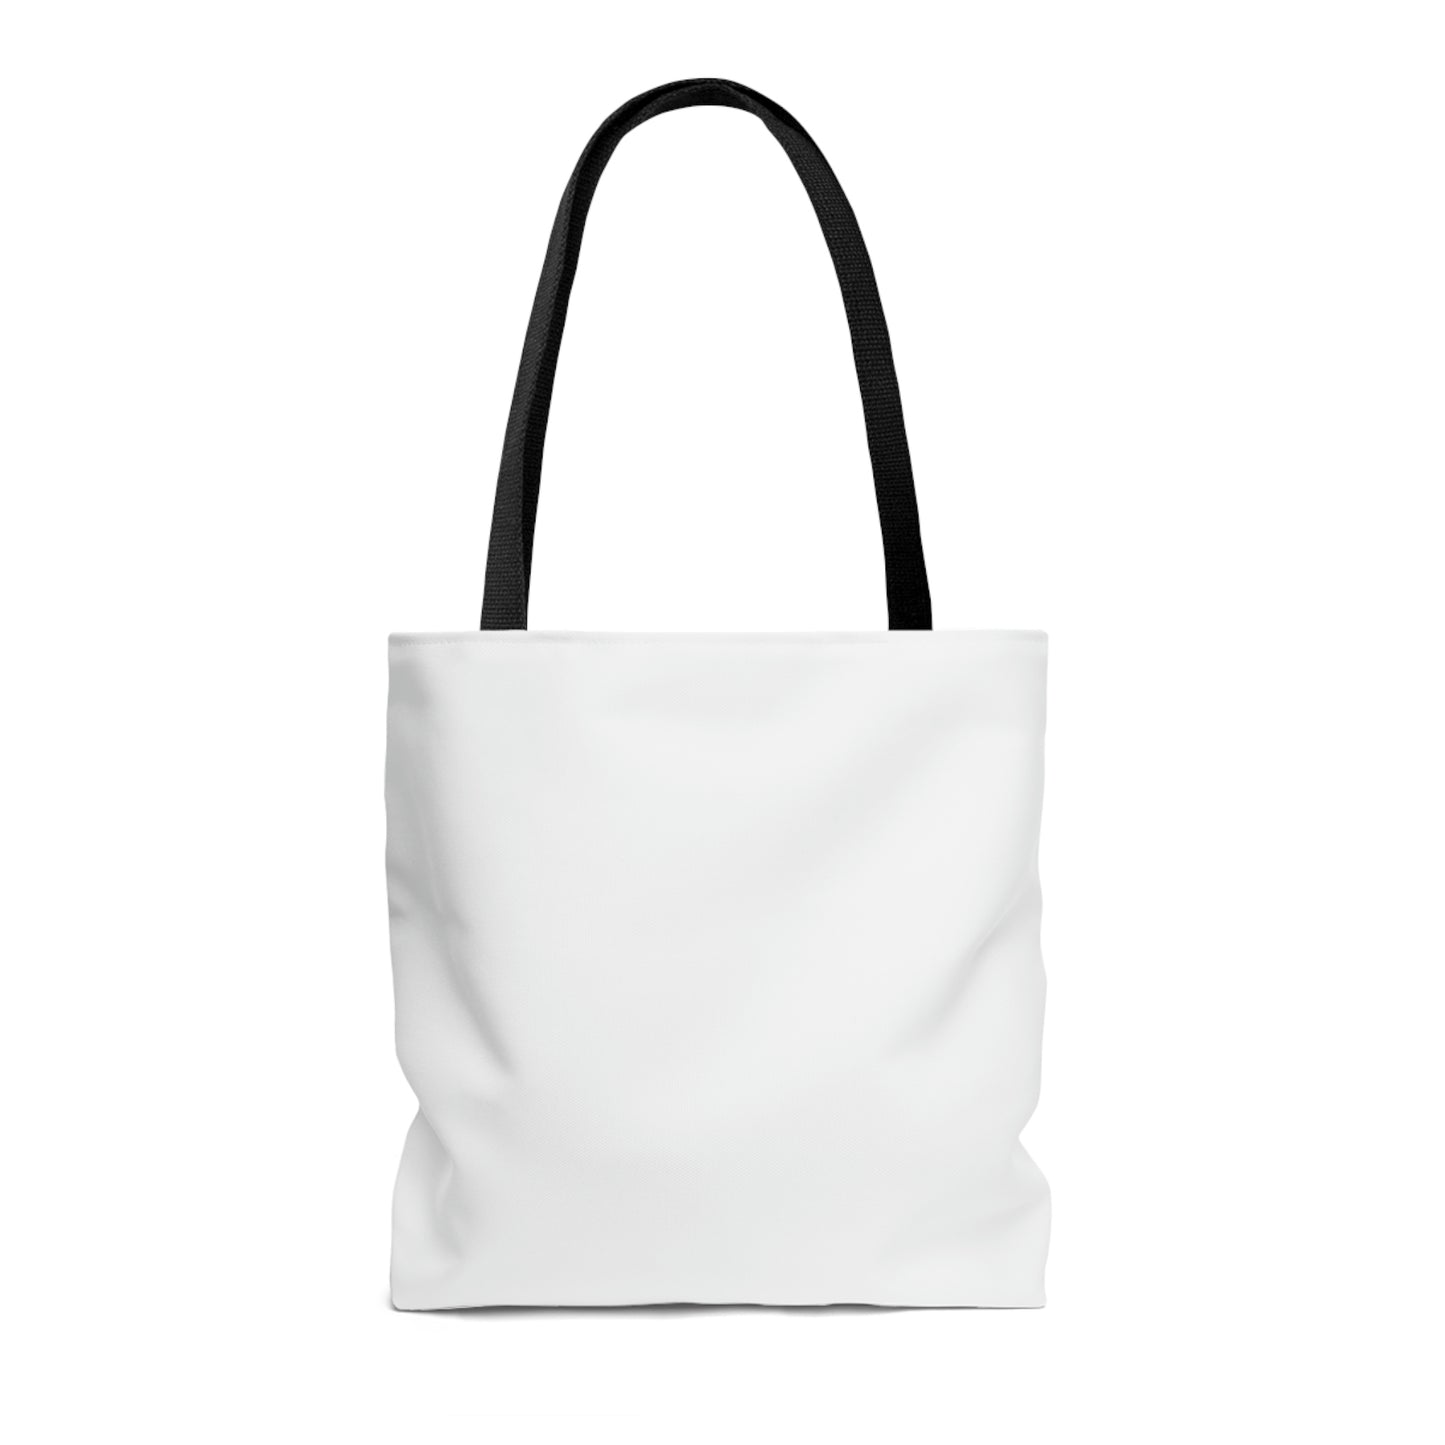 The Bible as Simple as ABC P AOP Tote Bag